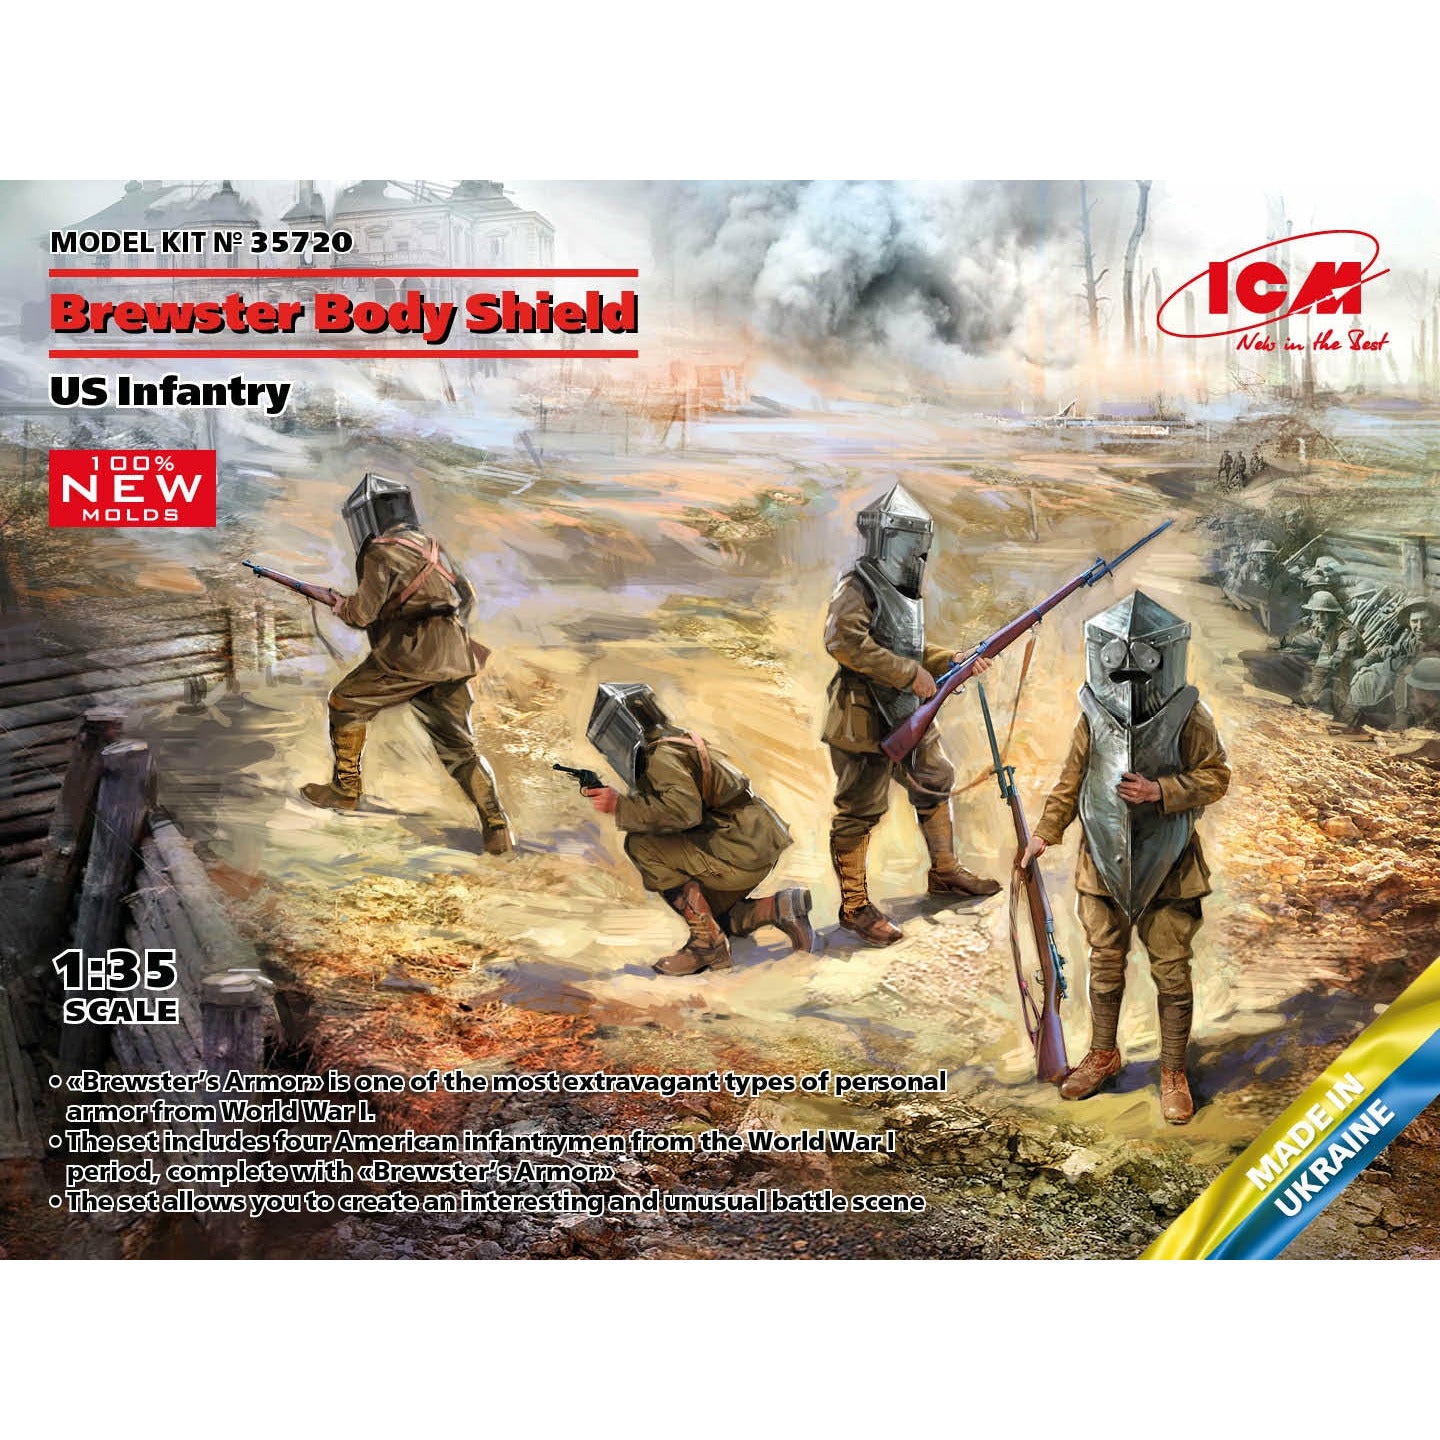 Brewster Body Shield US Infantry (100% New Molds) 1/35 #35720 by ICM